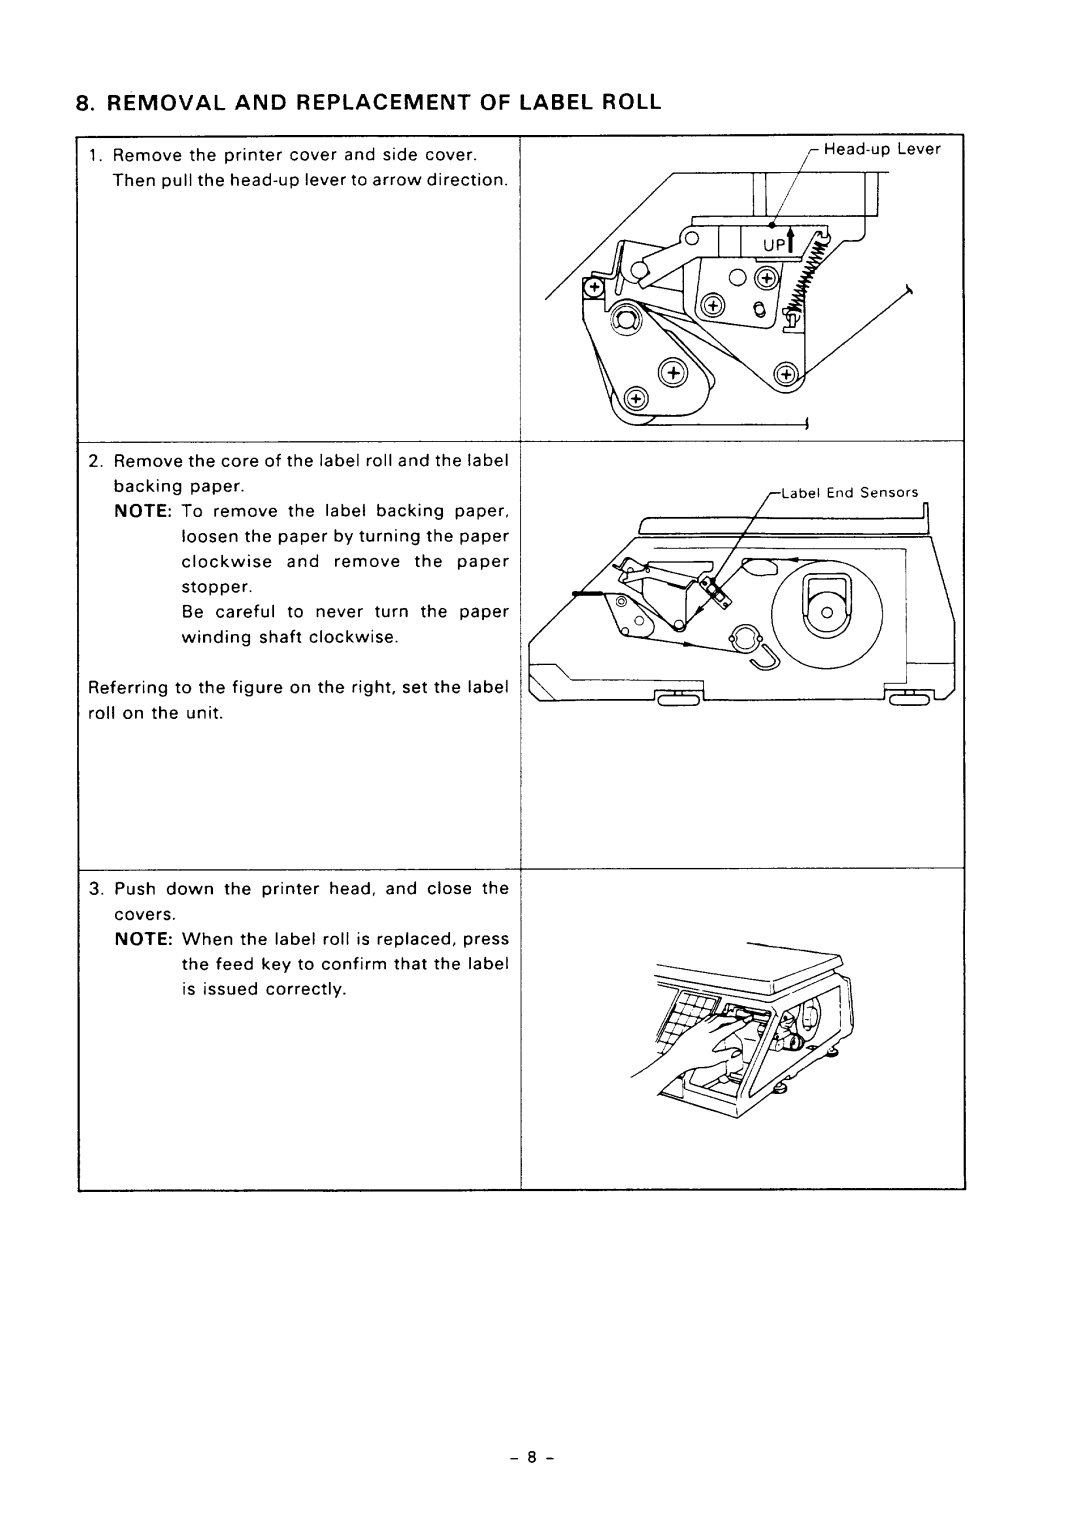 Toshiba SL57 SERIES owner manual Removal, Replacement, Of Label Roll 